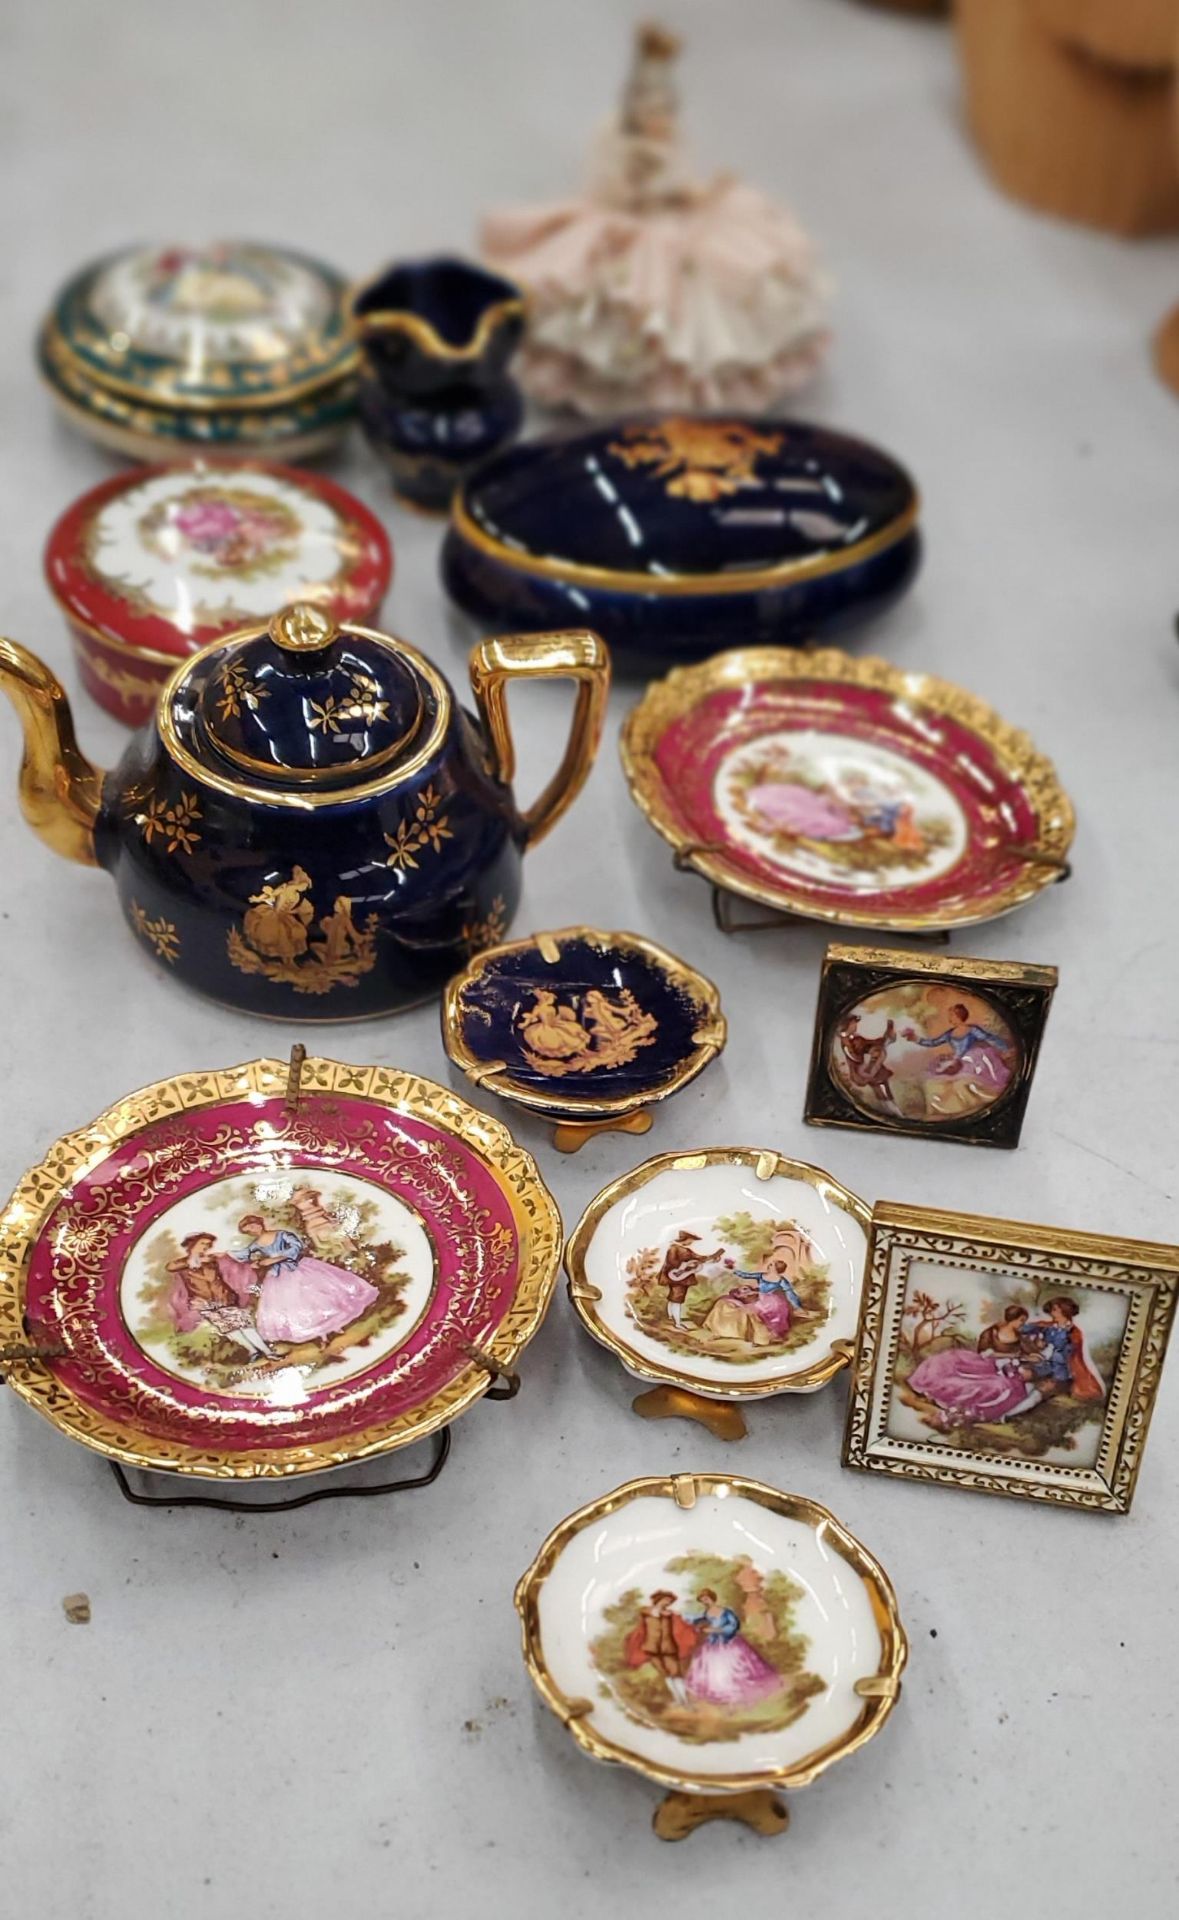 A COLLECTION OF MINIATURE LIMOGES TO INCLUDE TRINKET BOXES, PLATES, A TEAPOT, ETC PLUS A DRESDEN